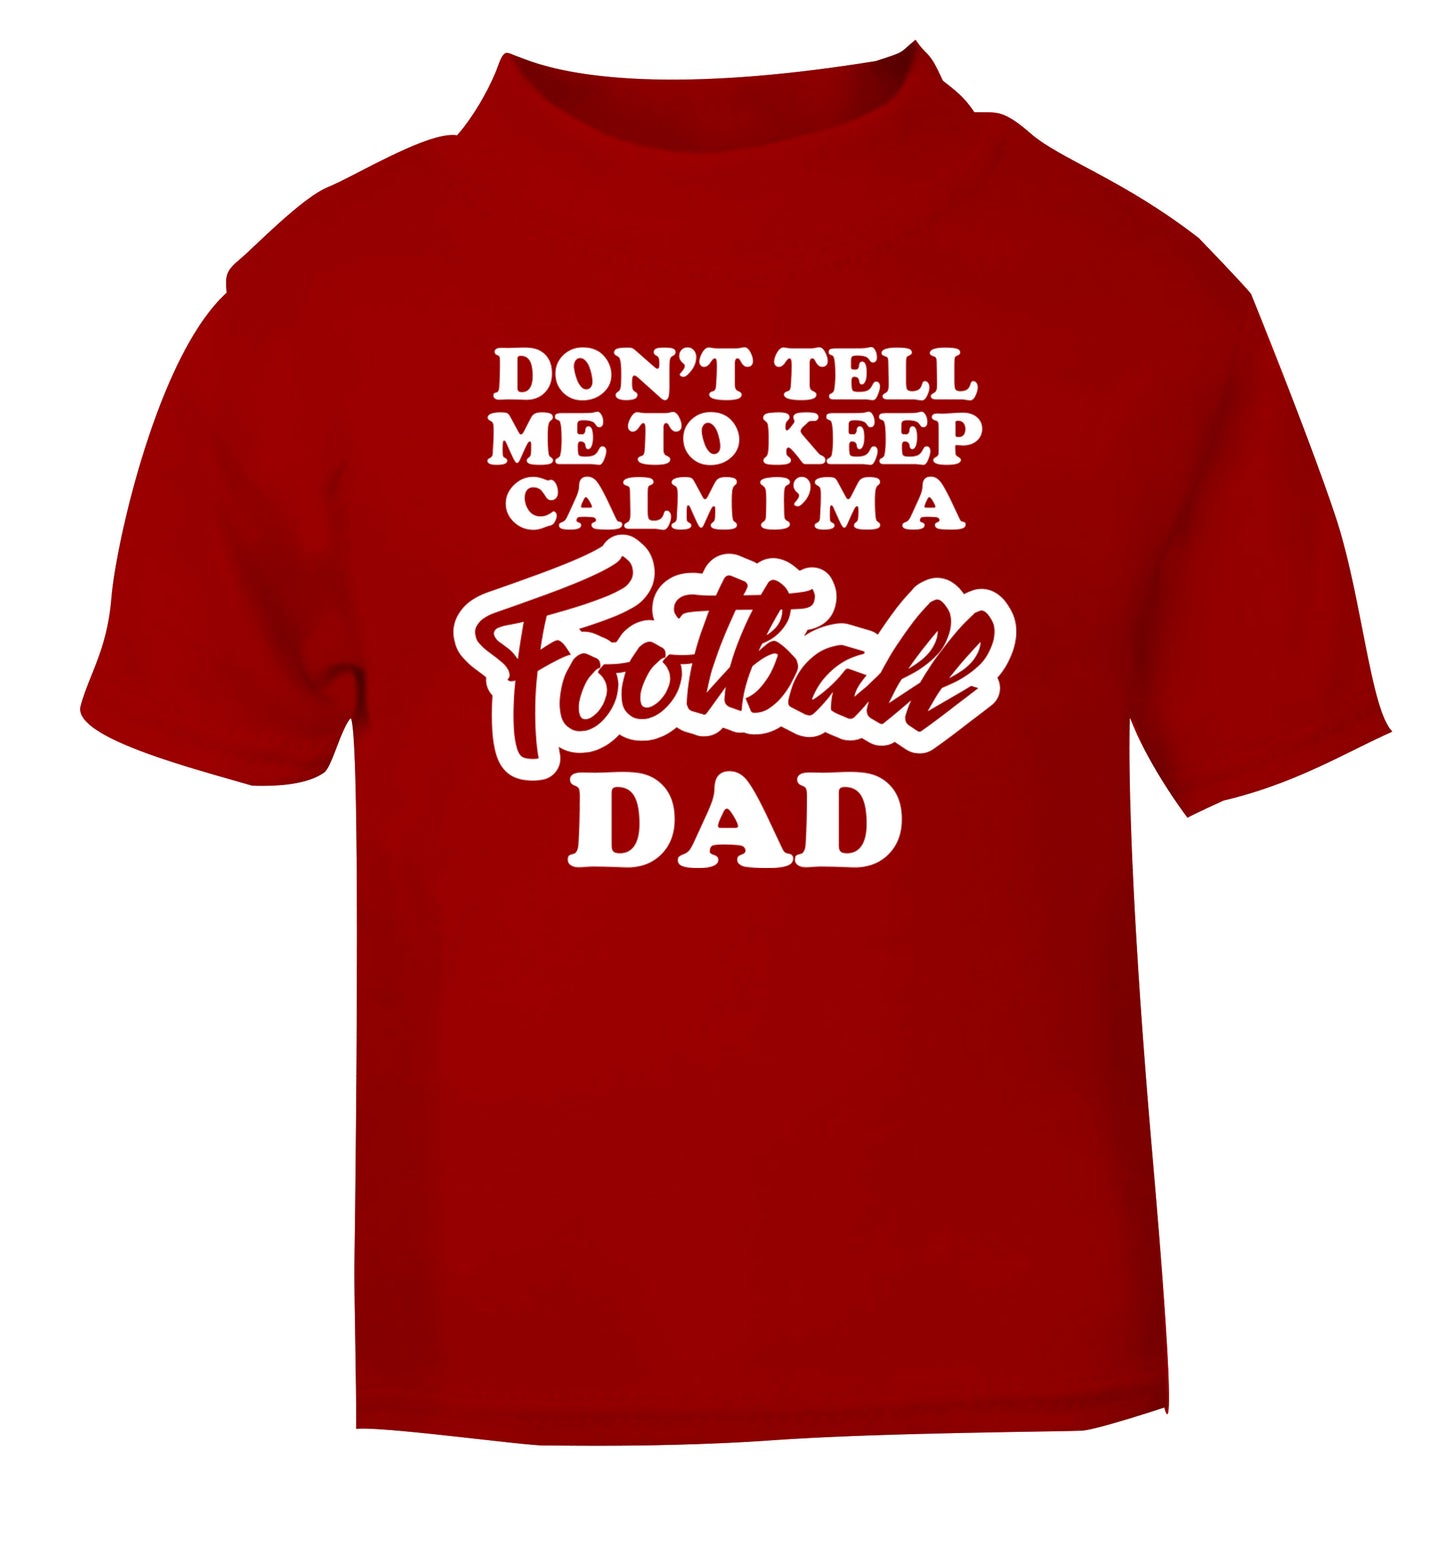 Don't tell me to keep calm I'm a football dad red Baby Toddler Tshirt 2 Years